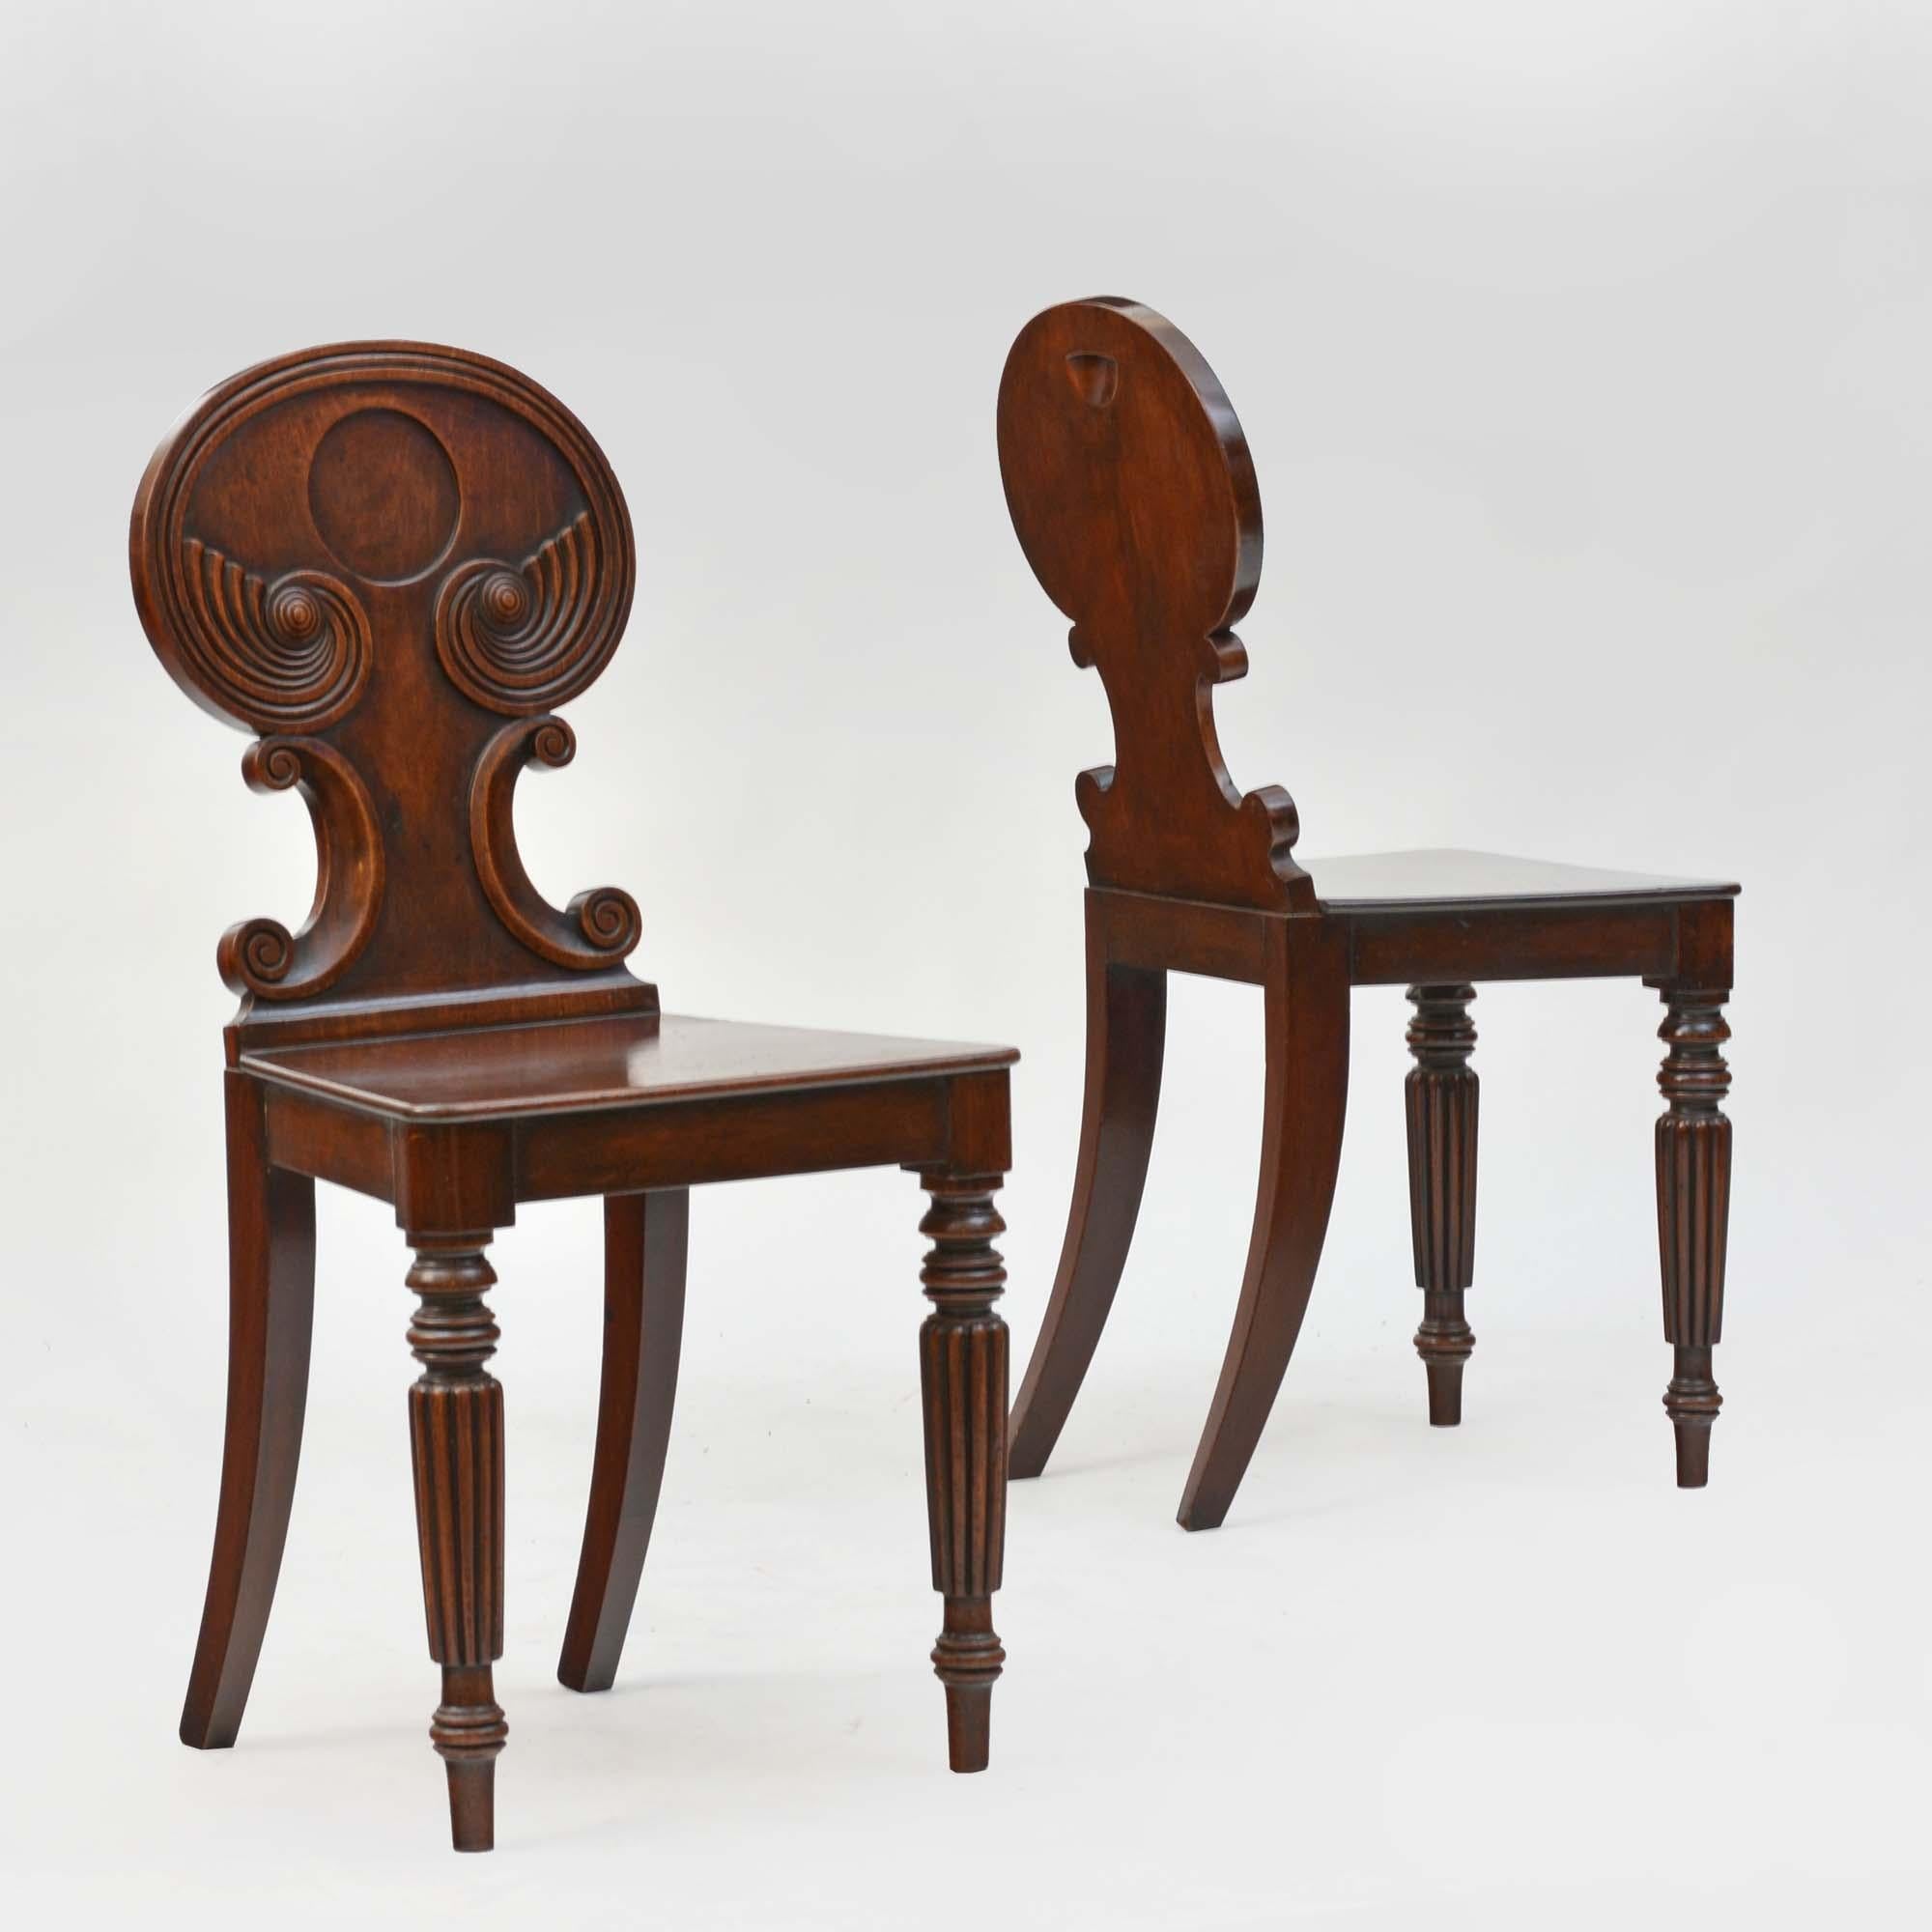 A pair of antique Regency mahogany hall chairs, the oval backs with gadrooned scroll carving terminating with domed paterae and supported by a pair of carved scrolls. The tapered boarded seats are supported by fluted turned and reverse sabre legs.